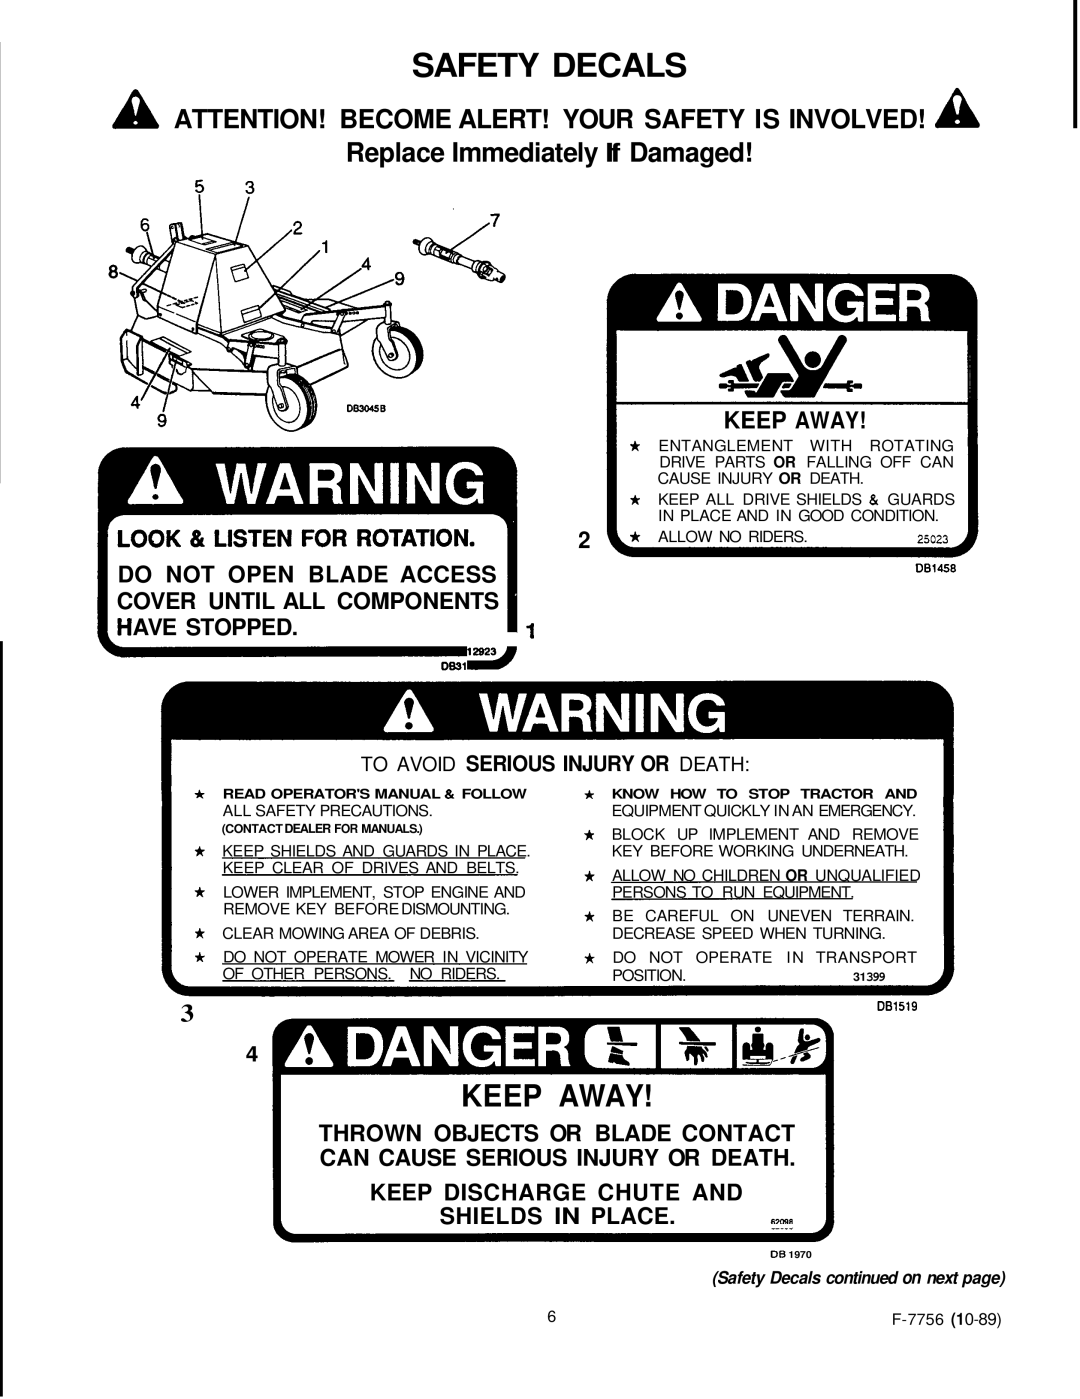 Honda Power Equipment RM752A Safety Decals, Keep Away, A Attention! Become Alert! Your Safety Is Involved! A, Ave Stopped 